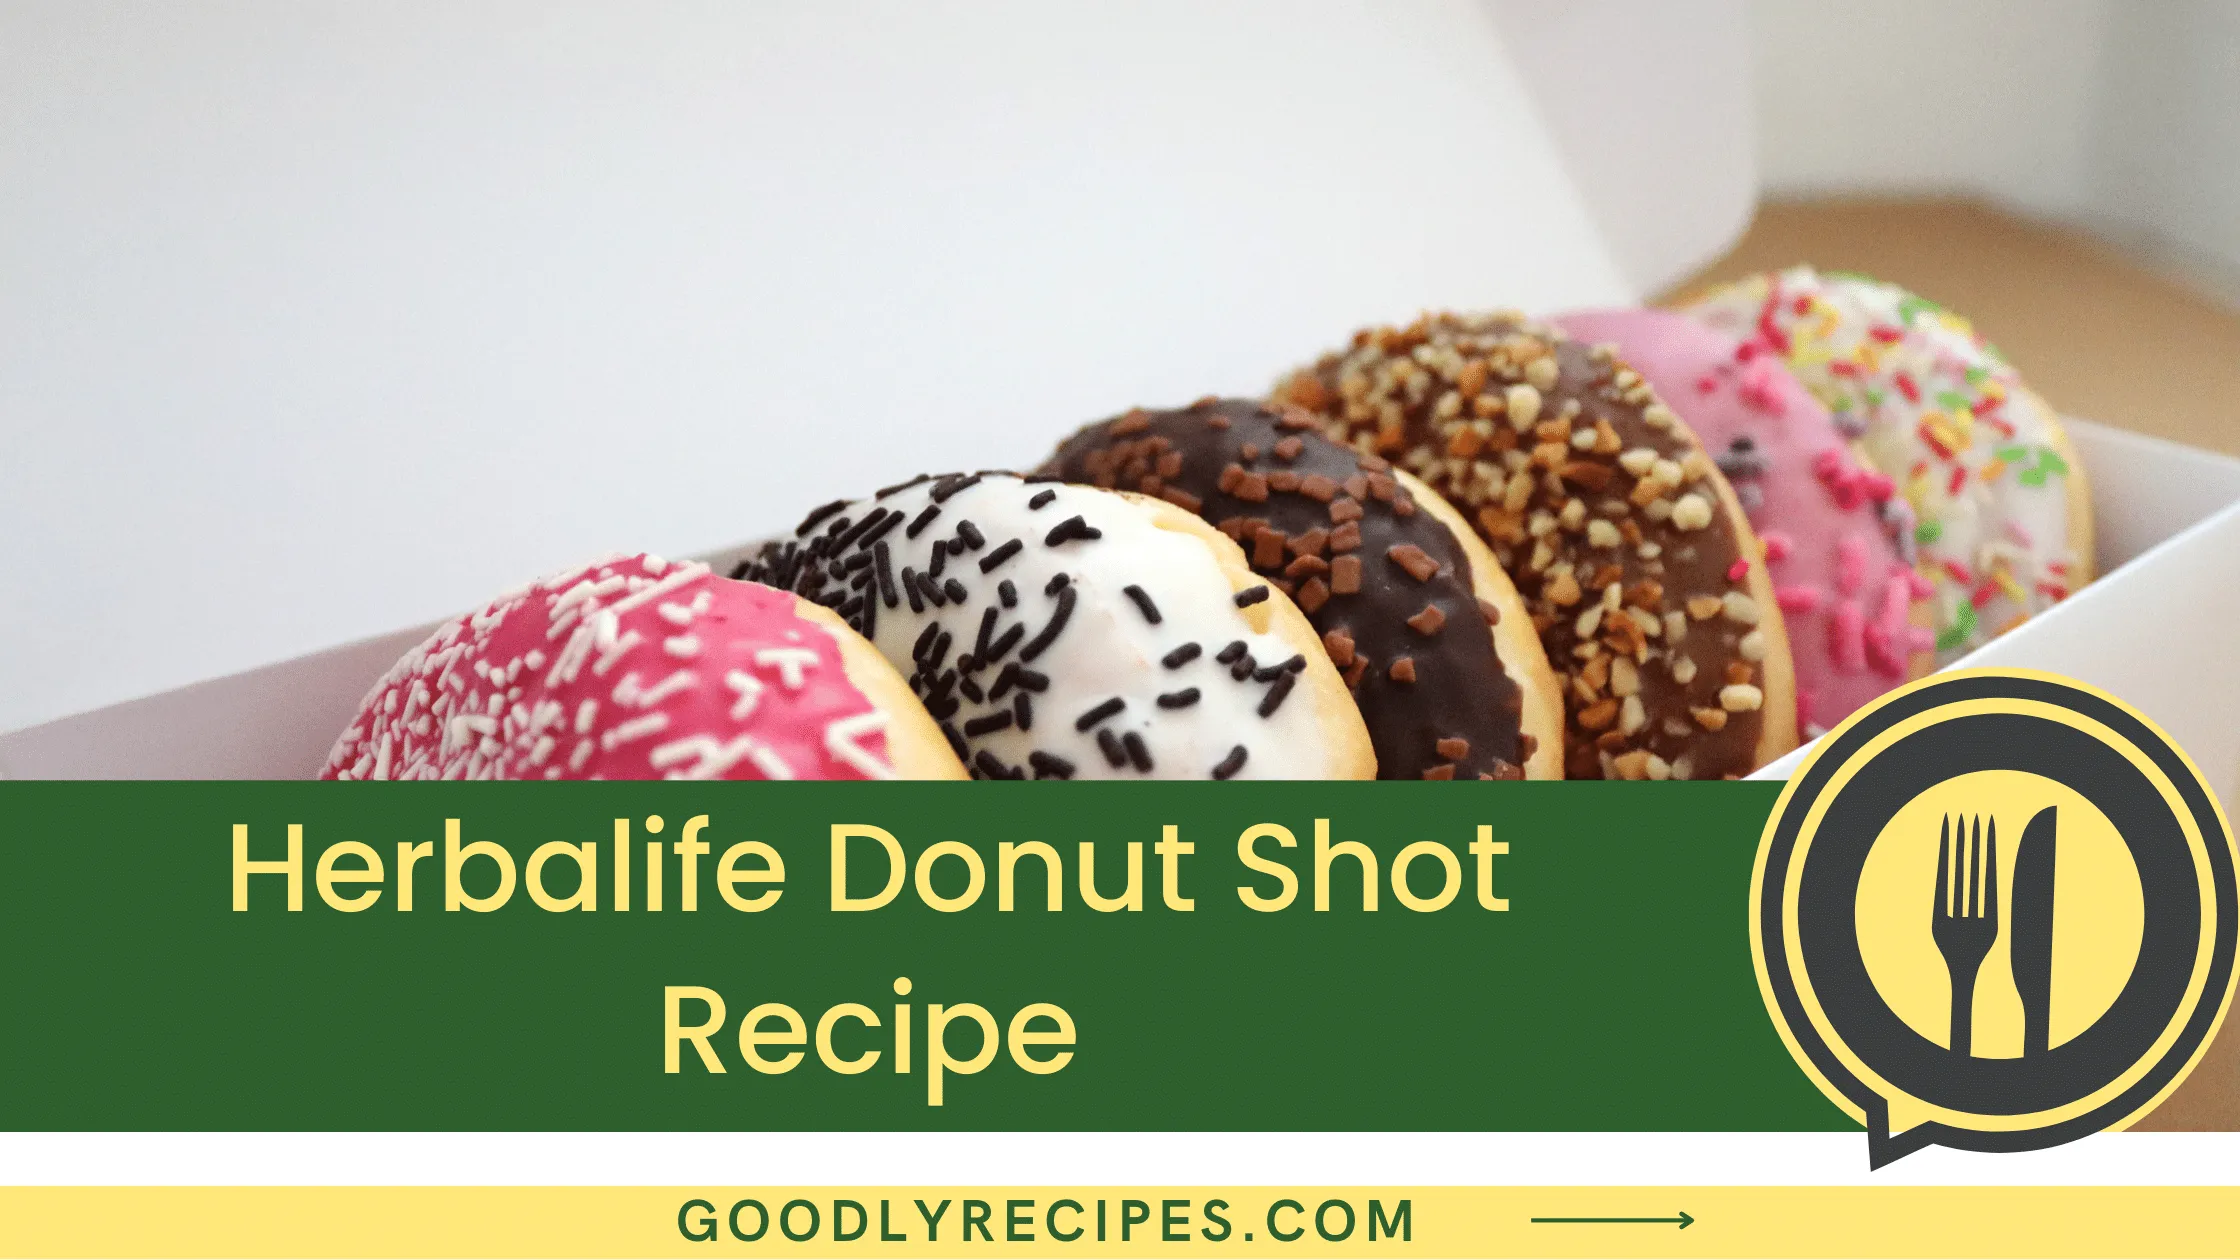 What is Herbalife Donut Shot?